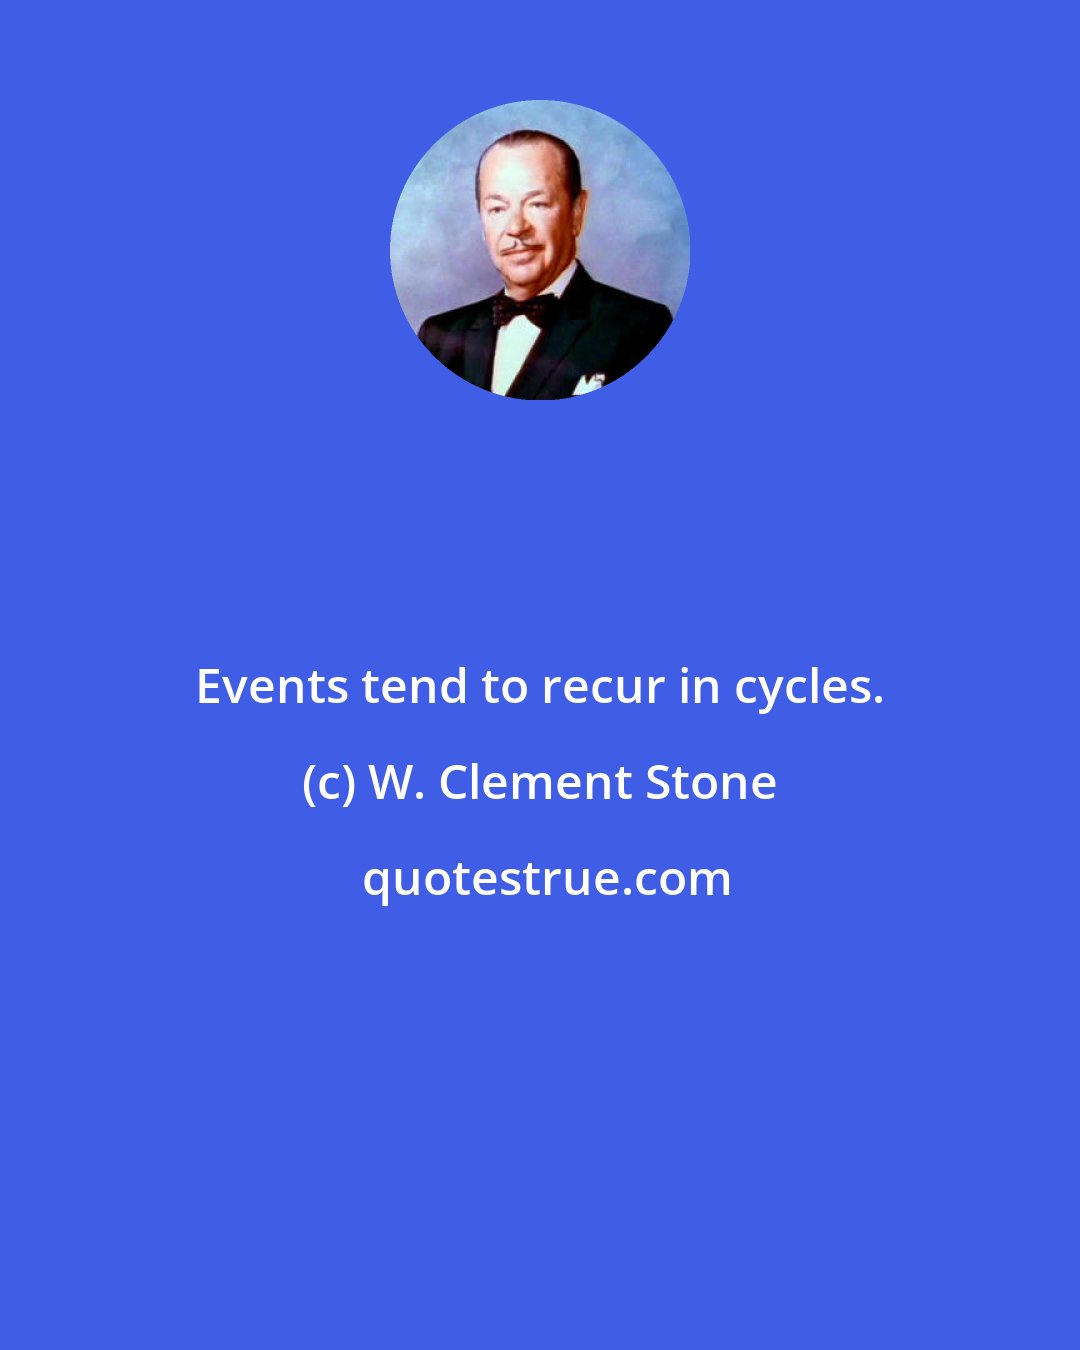 W. Clement Stone: Events tend to recur in cycles.